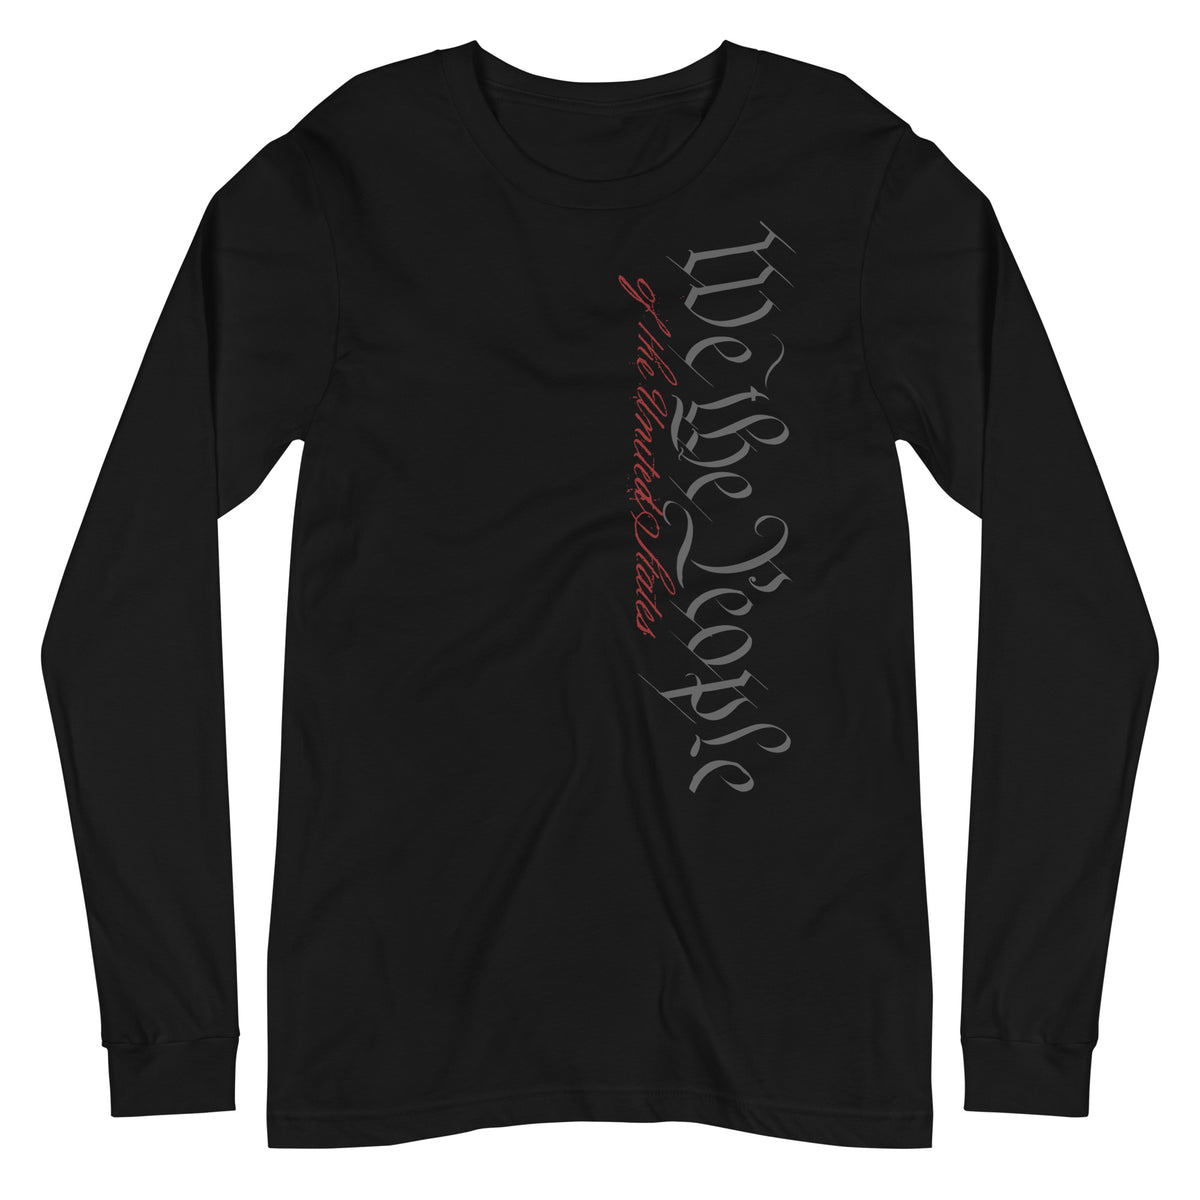 The Constitution Onyx Long Sleeve